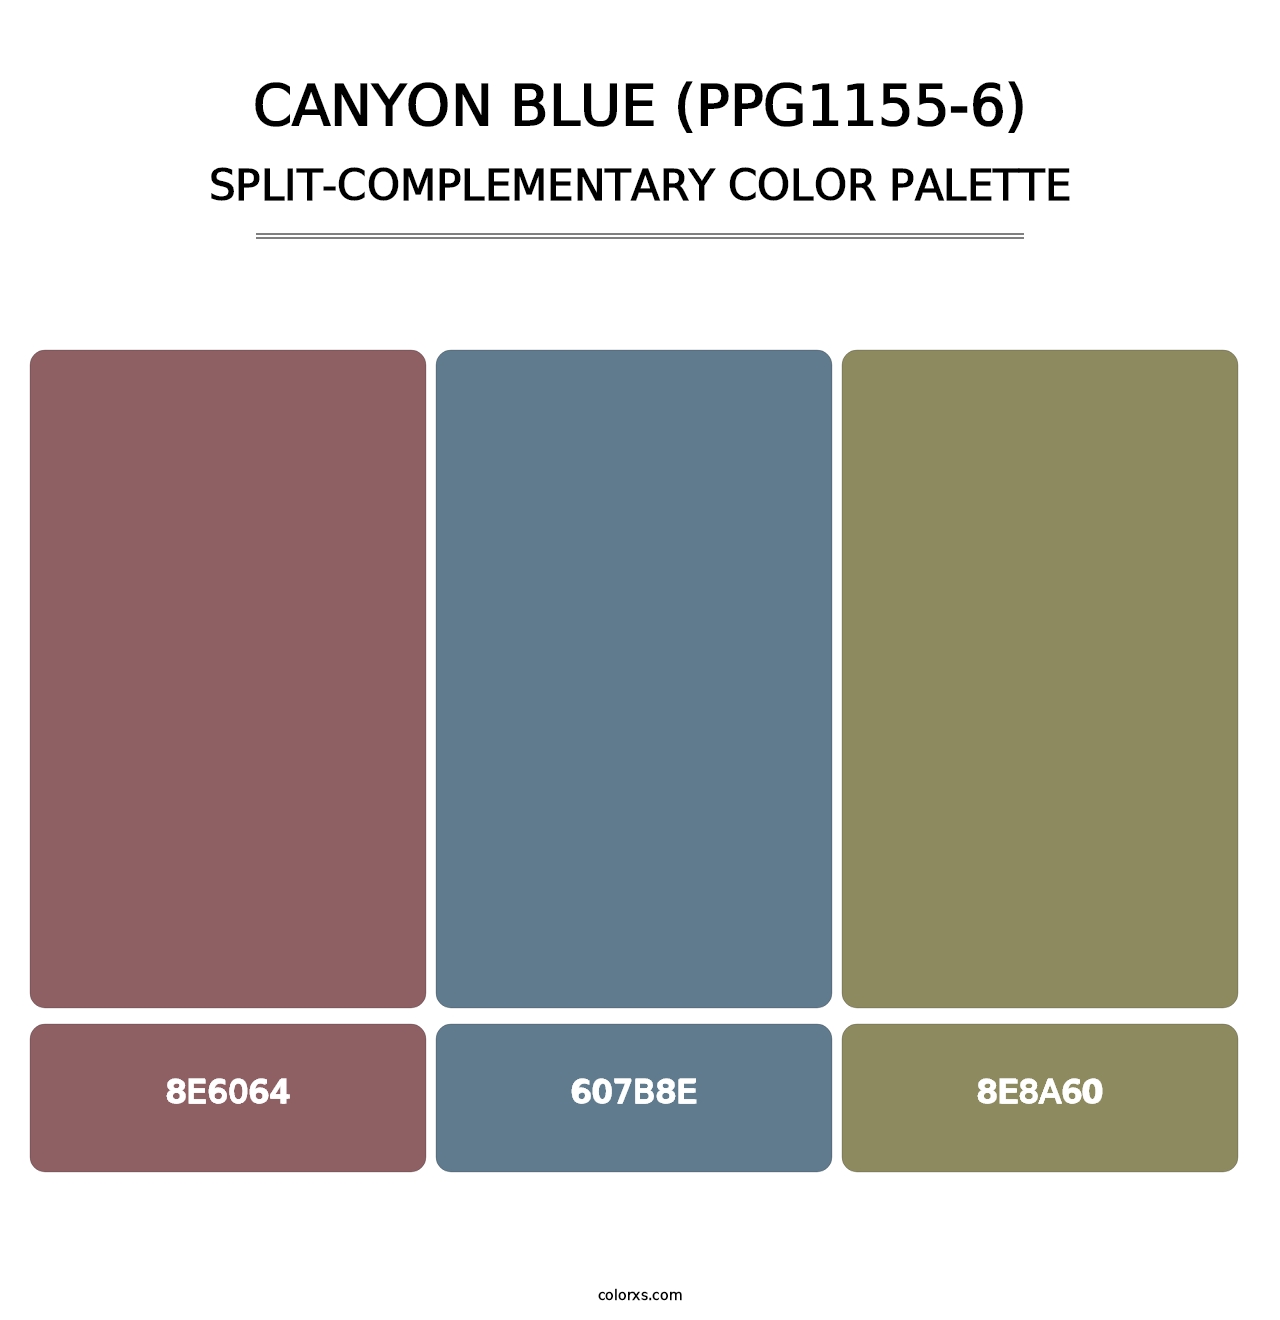 Canyon Blue (PPG1155-6) - Split-Complementary Color Palette